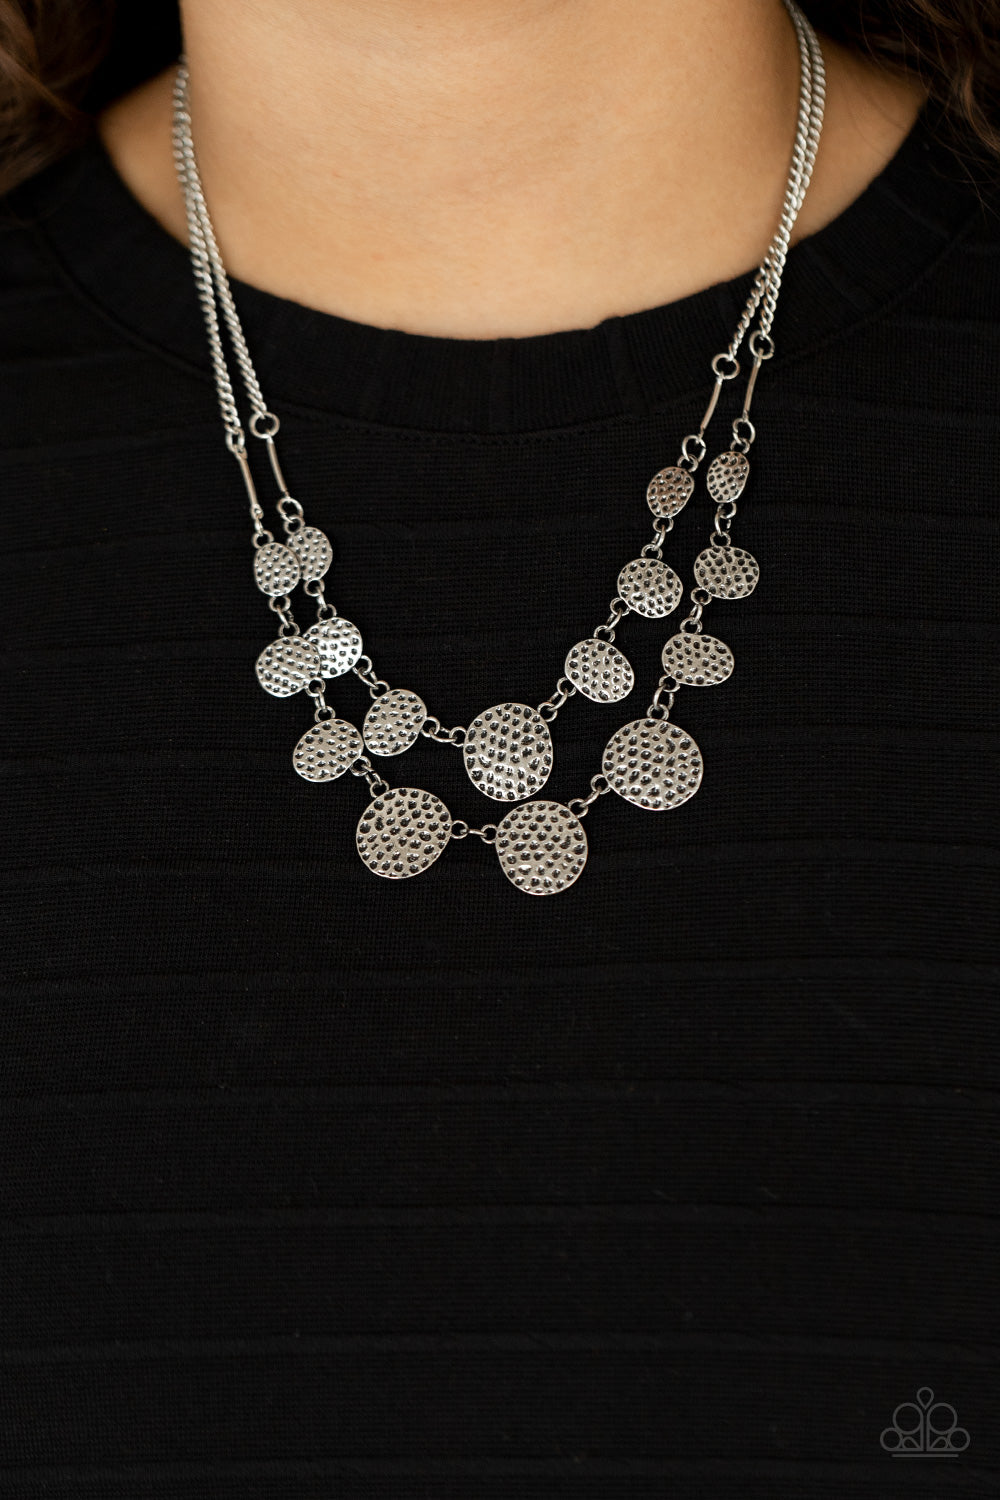 PRE-ORDER - Paparazzi Pebble Me Pretty - Silver - Necklace & Earrings - $5 Jewelry with Ashley Swint